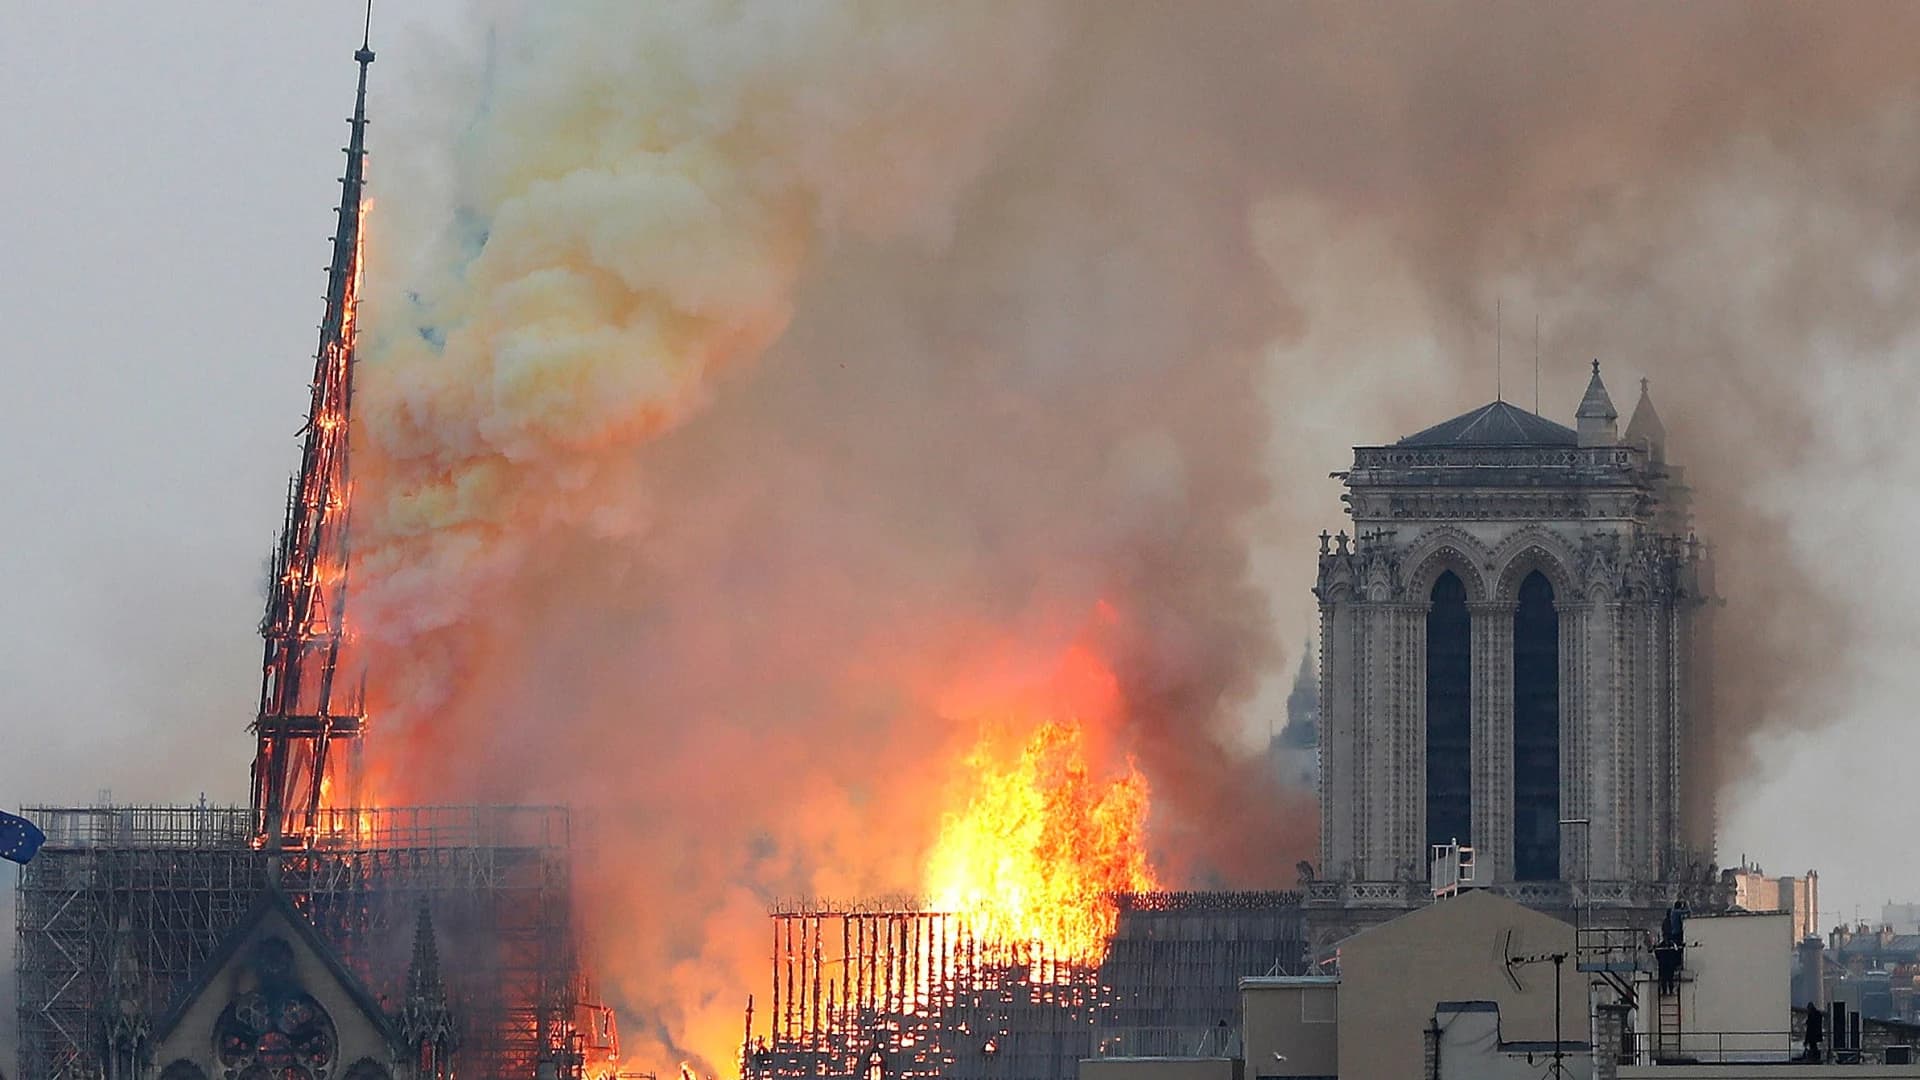 Flames engulf iconic Notre Dame Cathedral in Paris